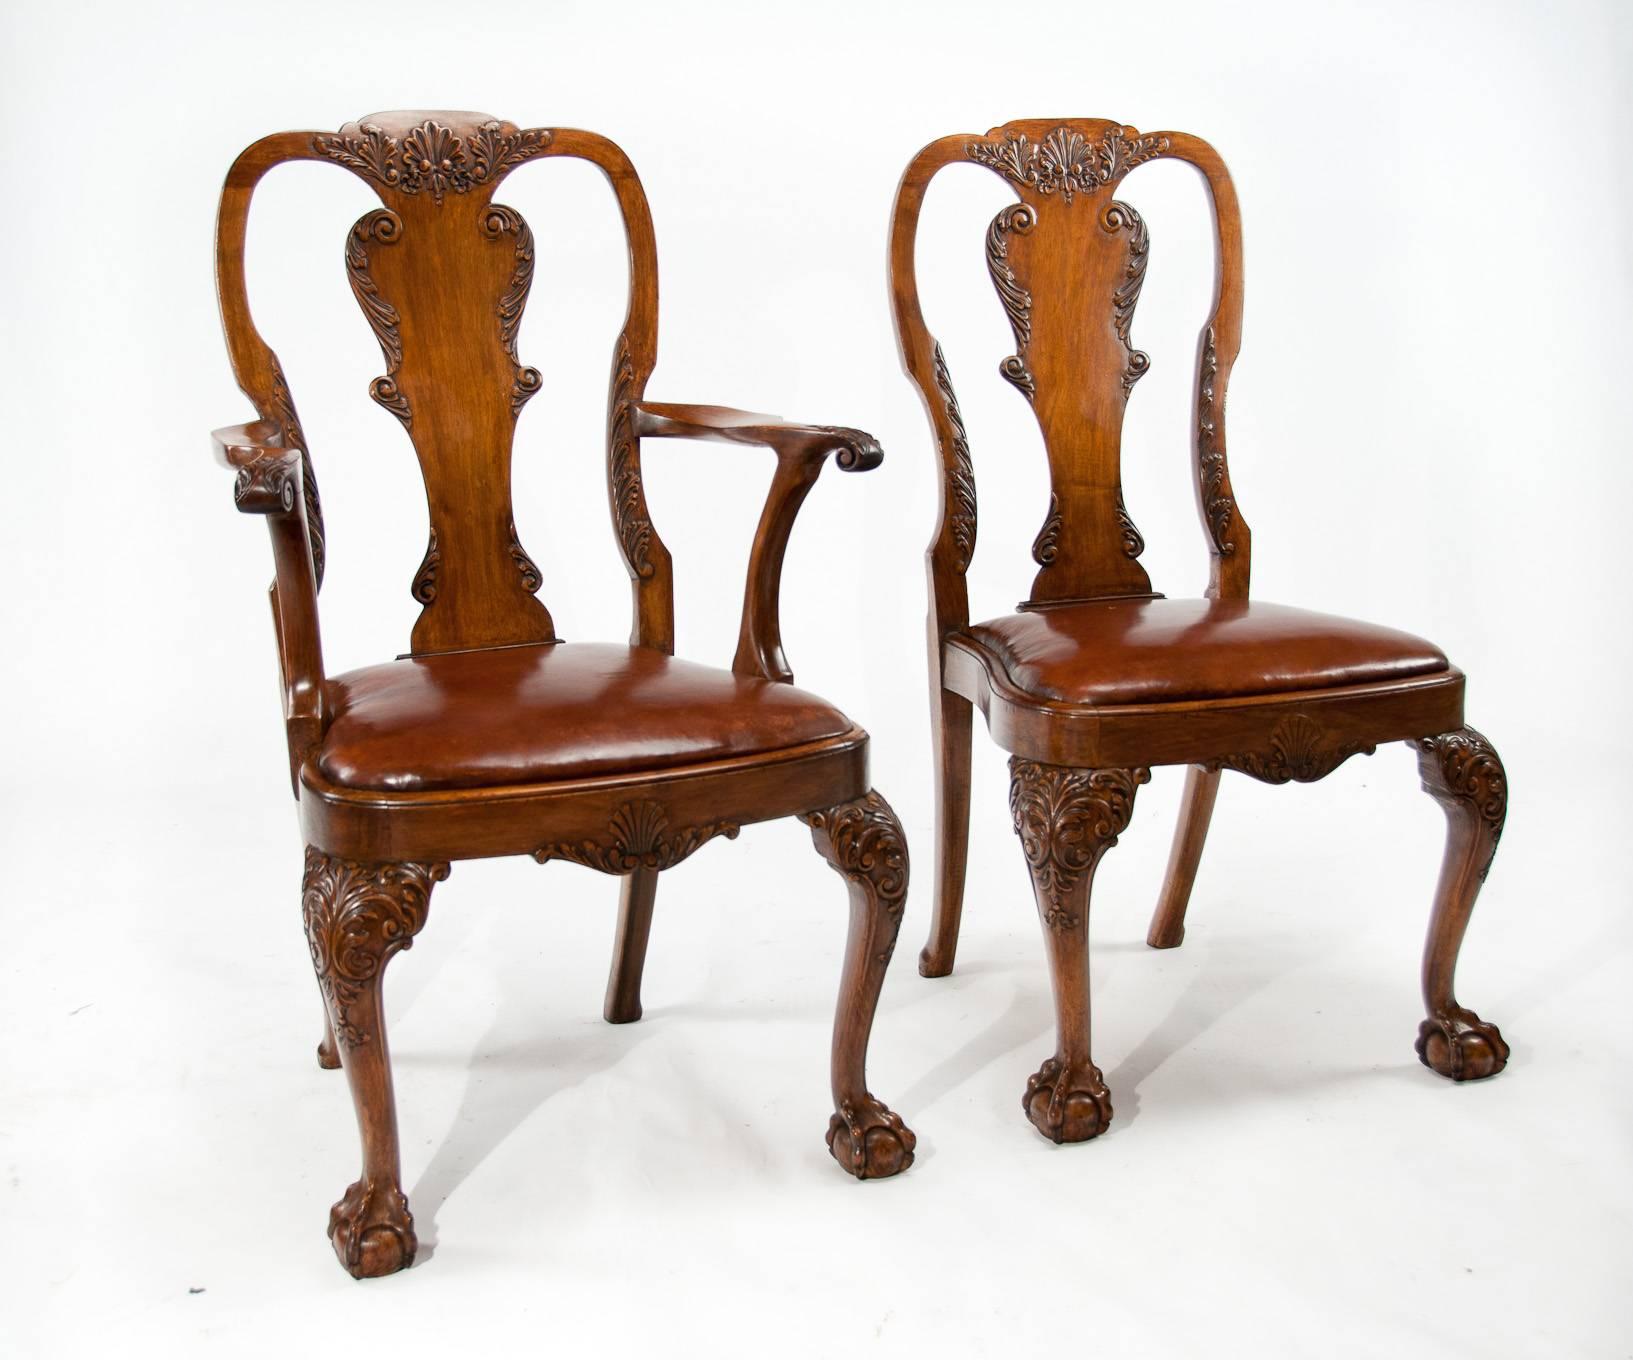 Very good quality and rare set of 12 (ten + two) antique walnut dining chairs with leather upholstered drop in seats dating to circa 1910s-1920s.
Constructed in a Queen Anne design this quality set of dining chairs comprise of ten single chairs